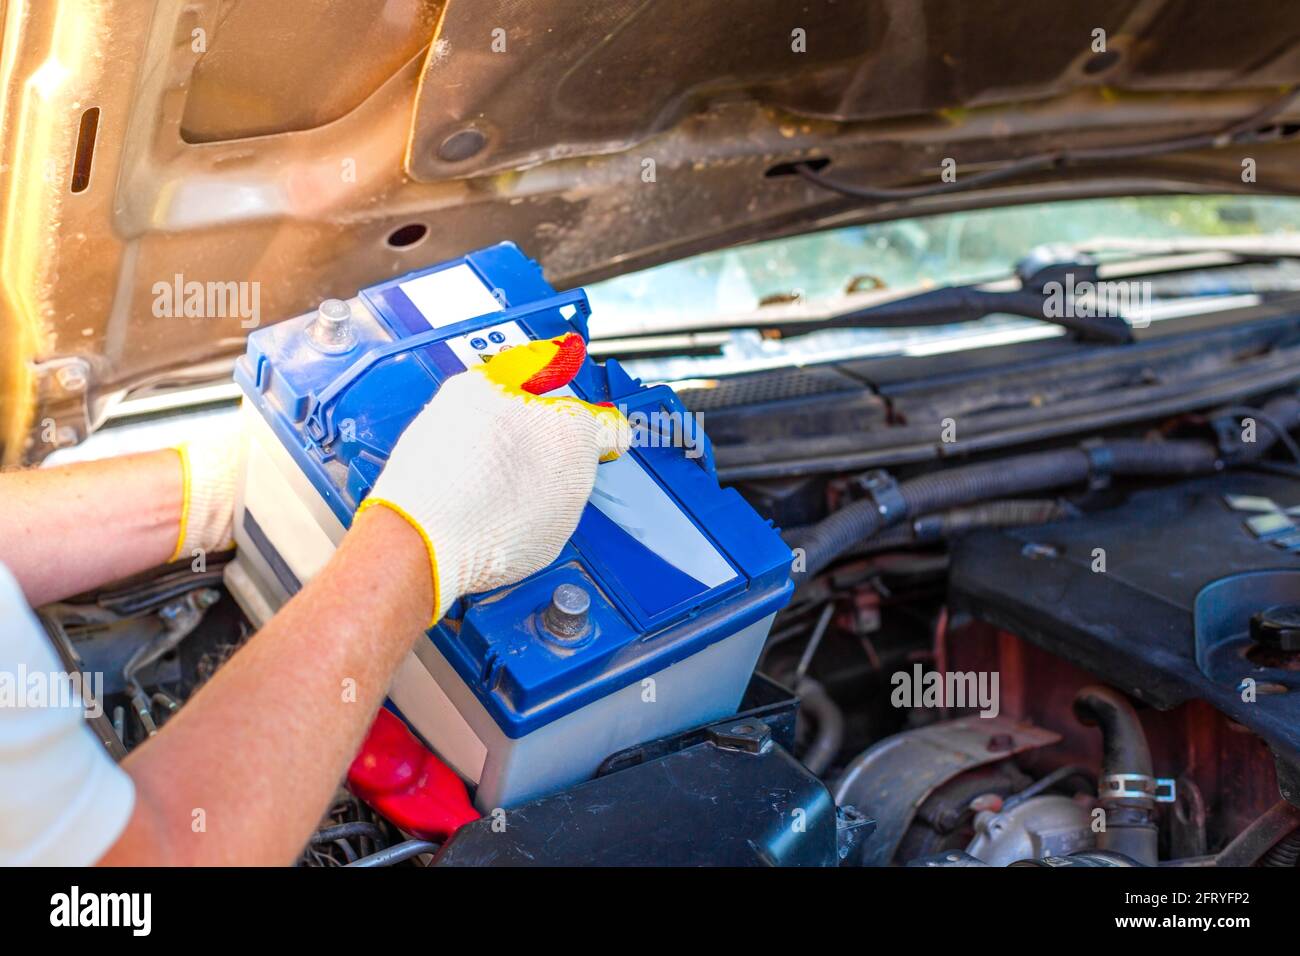 Maintenance of the machine. A male car mechanic takes out a battery from under the hood of a auto to repair, charge or replace it. Stock Photo